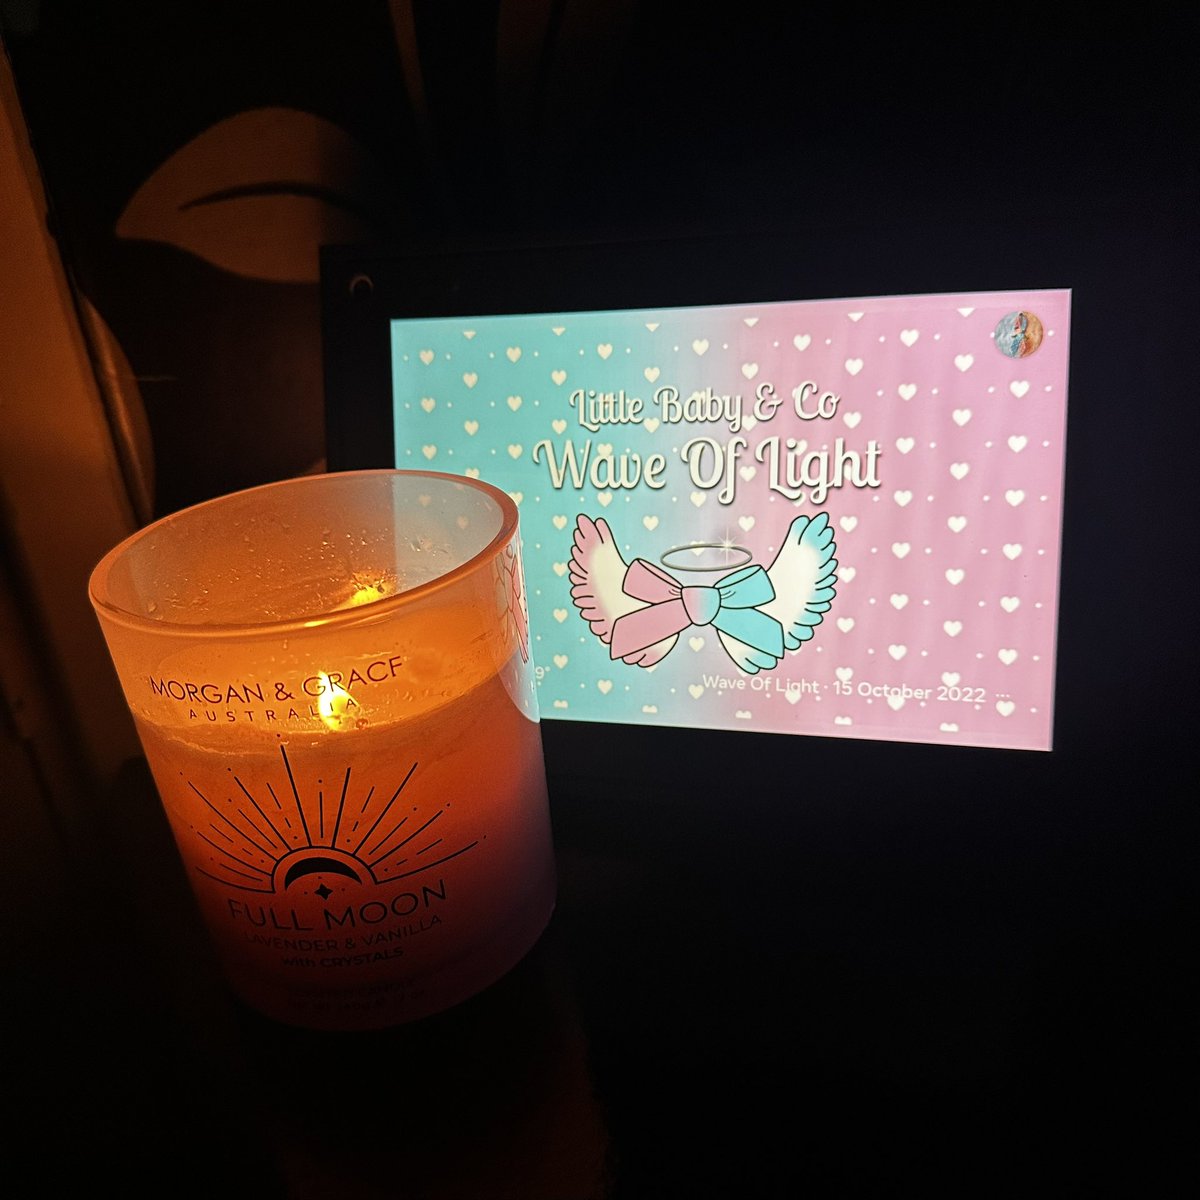 🩵🩷🕯️Wave of Light🕯️🩷🩵

#October15th #WaveOfLight
#EarlyMiscarriageAwarenessDay #EMAD
#EarlyMiscarriage #EarlyMiscarriageWaveOfLight
#EMWOL #EMWOL23 #Miscarriage #BabyLoss
#PregnancyLoss #Mint4EarlyMiscarriage #Candles
#Candle #Grief #Angel #AngelBaby #AngelMum #AngelDad